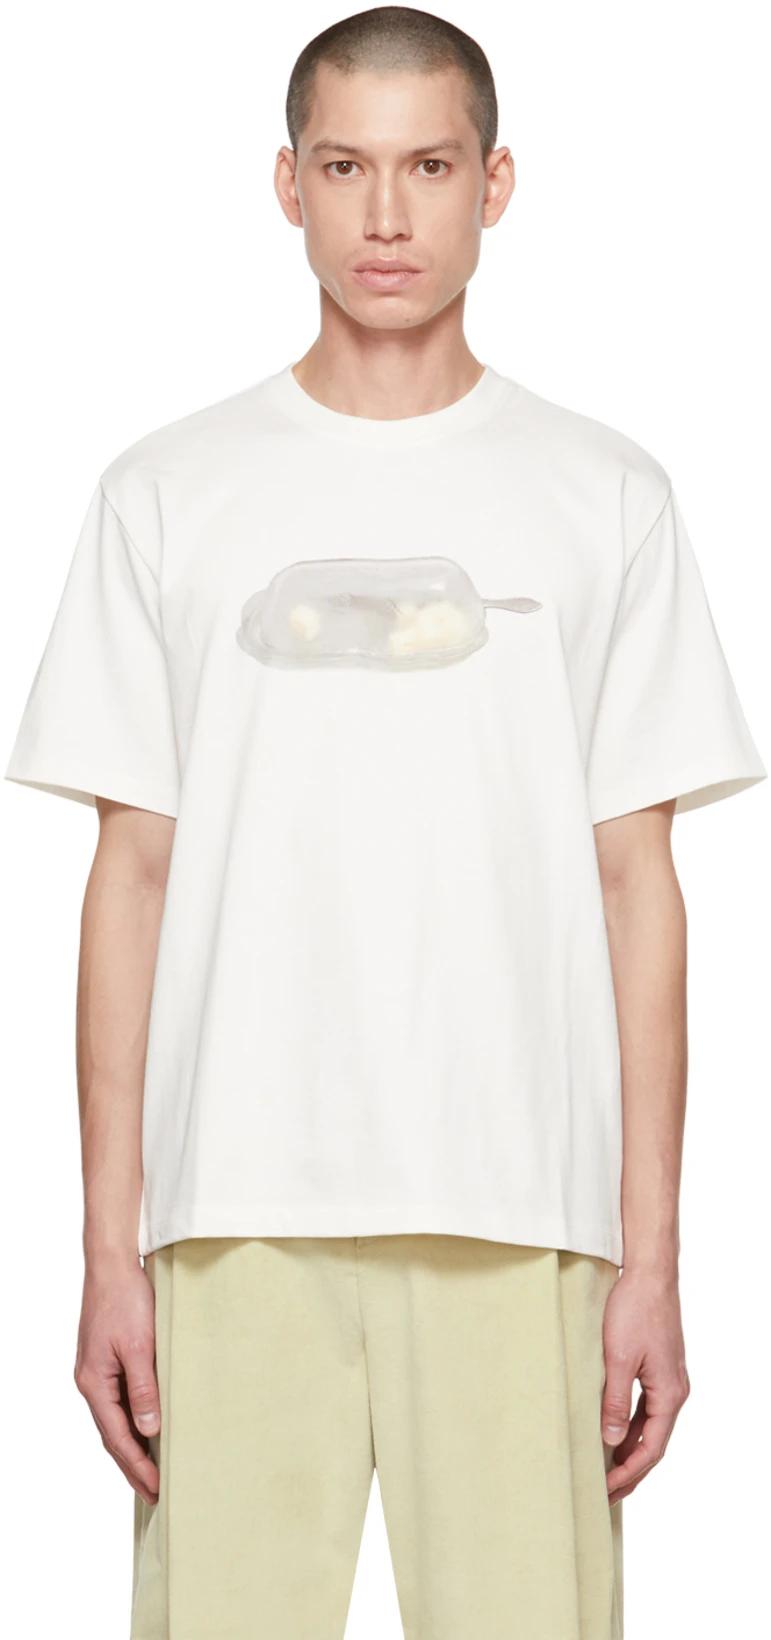 White Printed T-Shirt by AMOMENTO